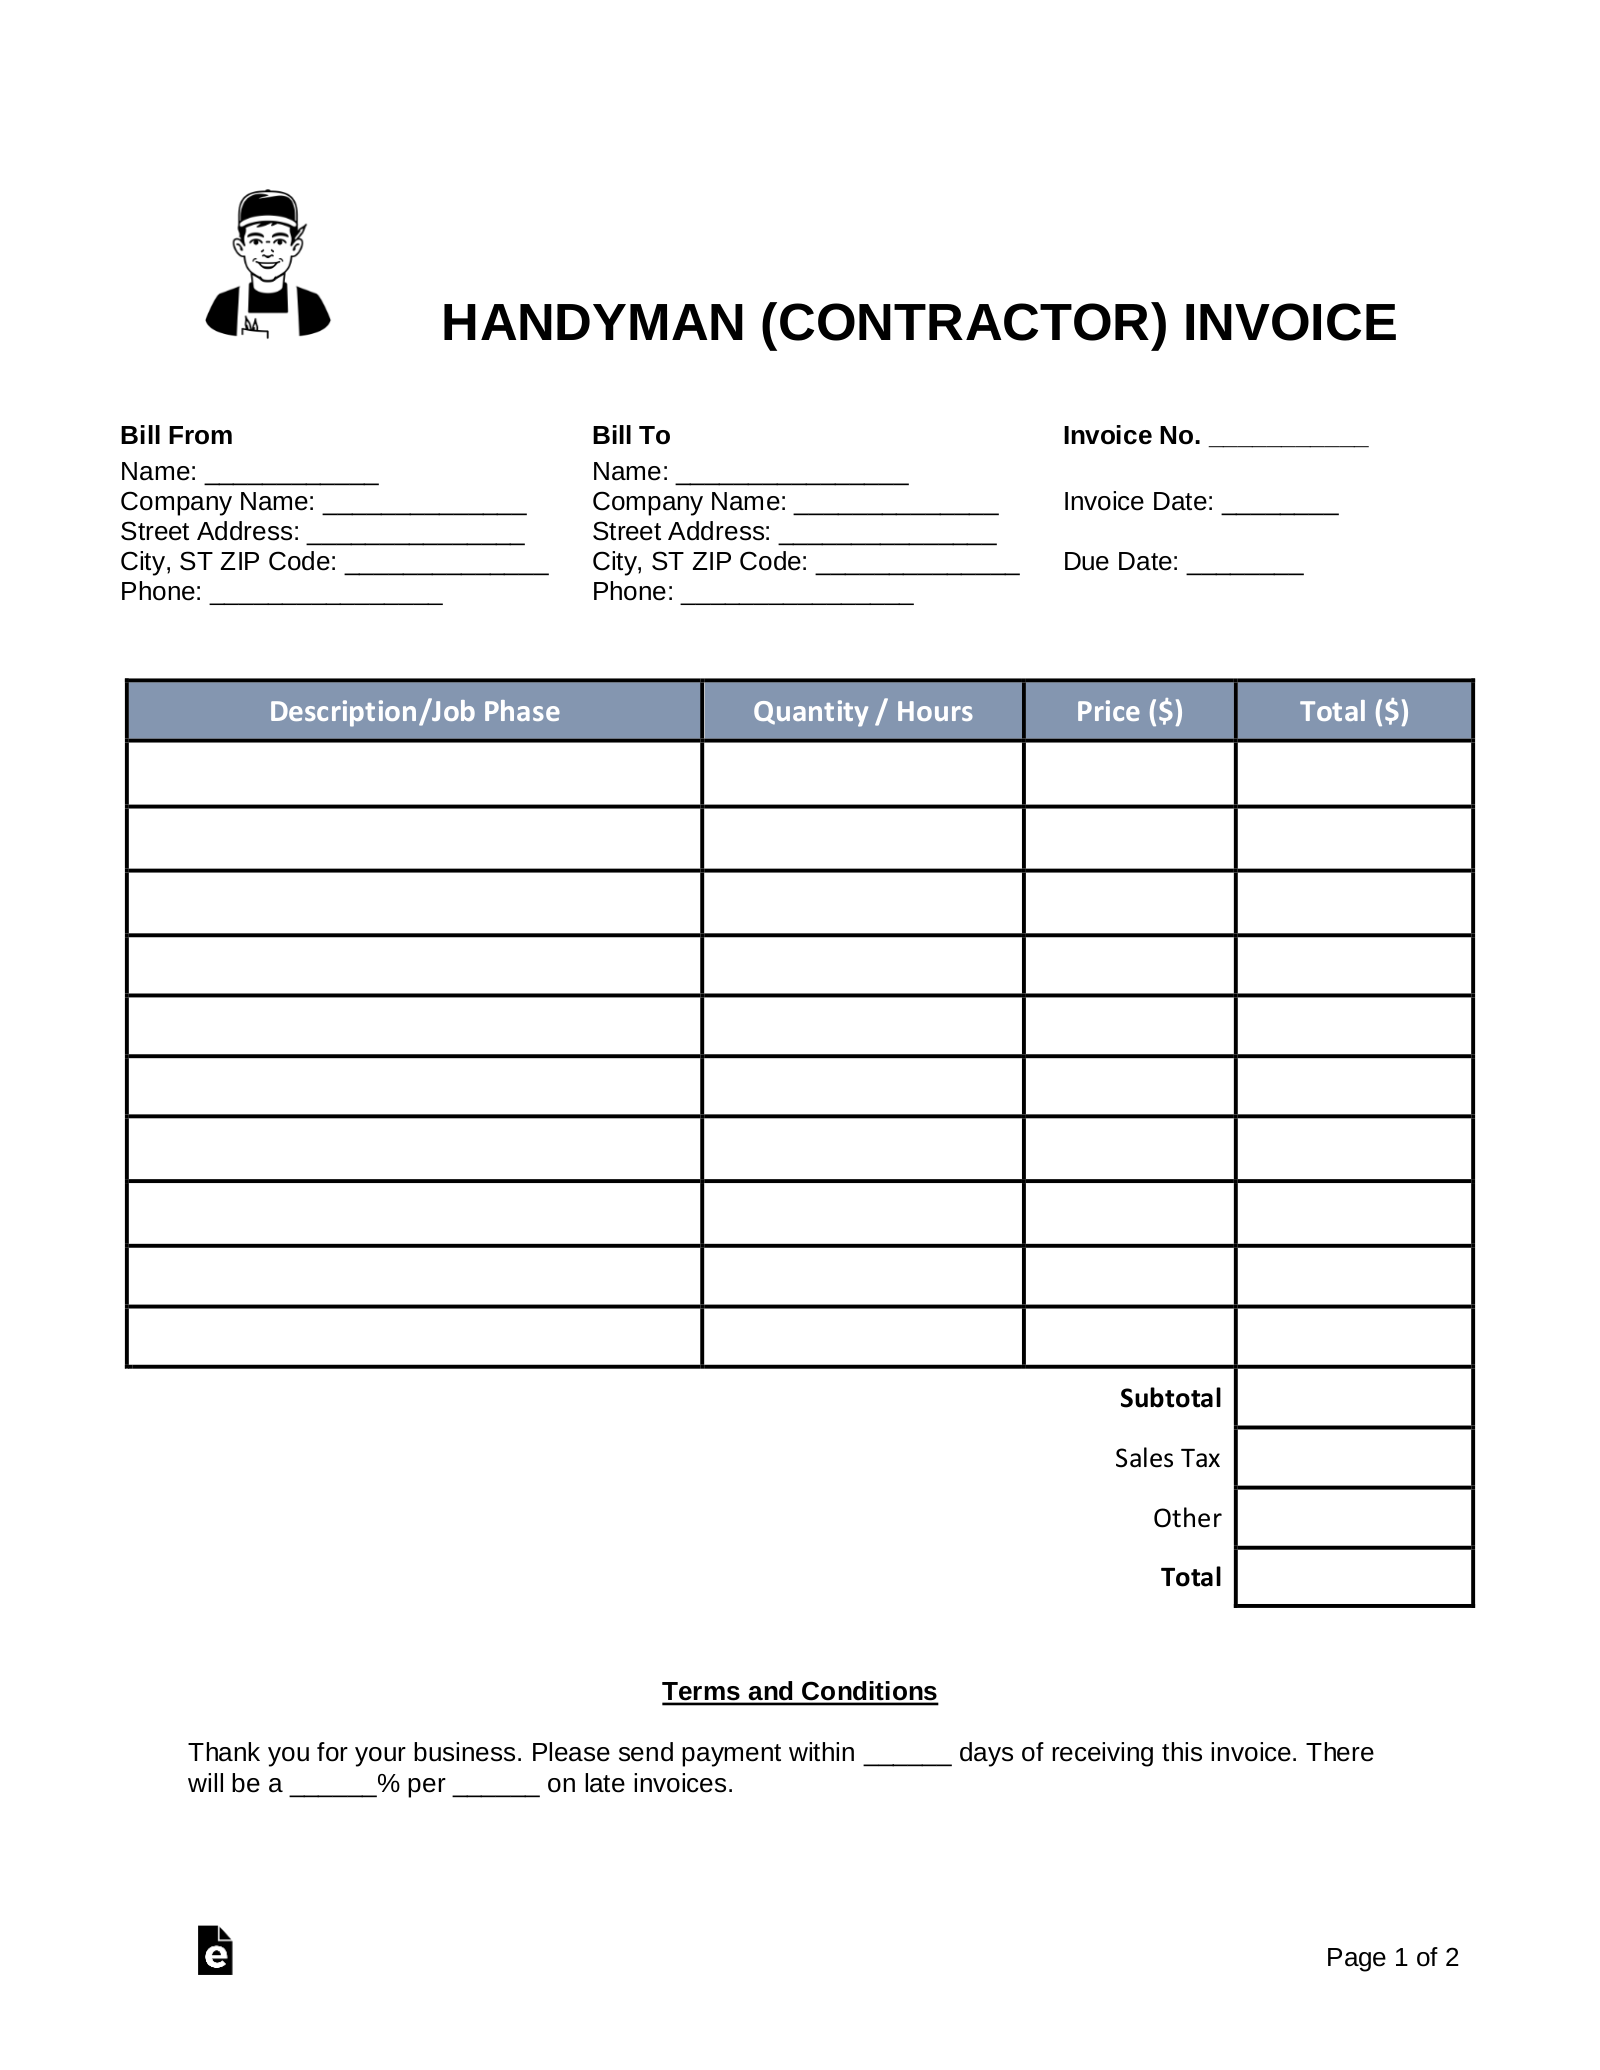 Free Handyman (Contractor) Invoice Template PDF Word eForms